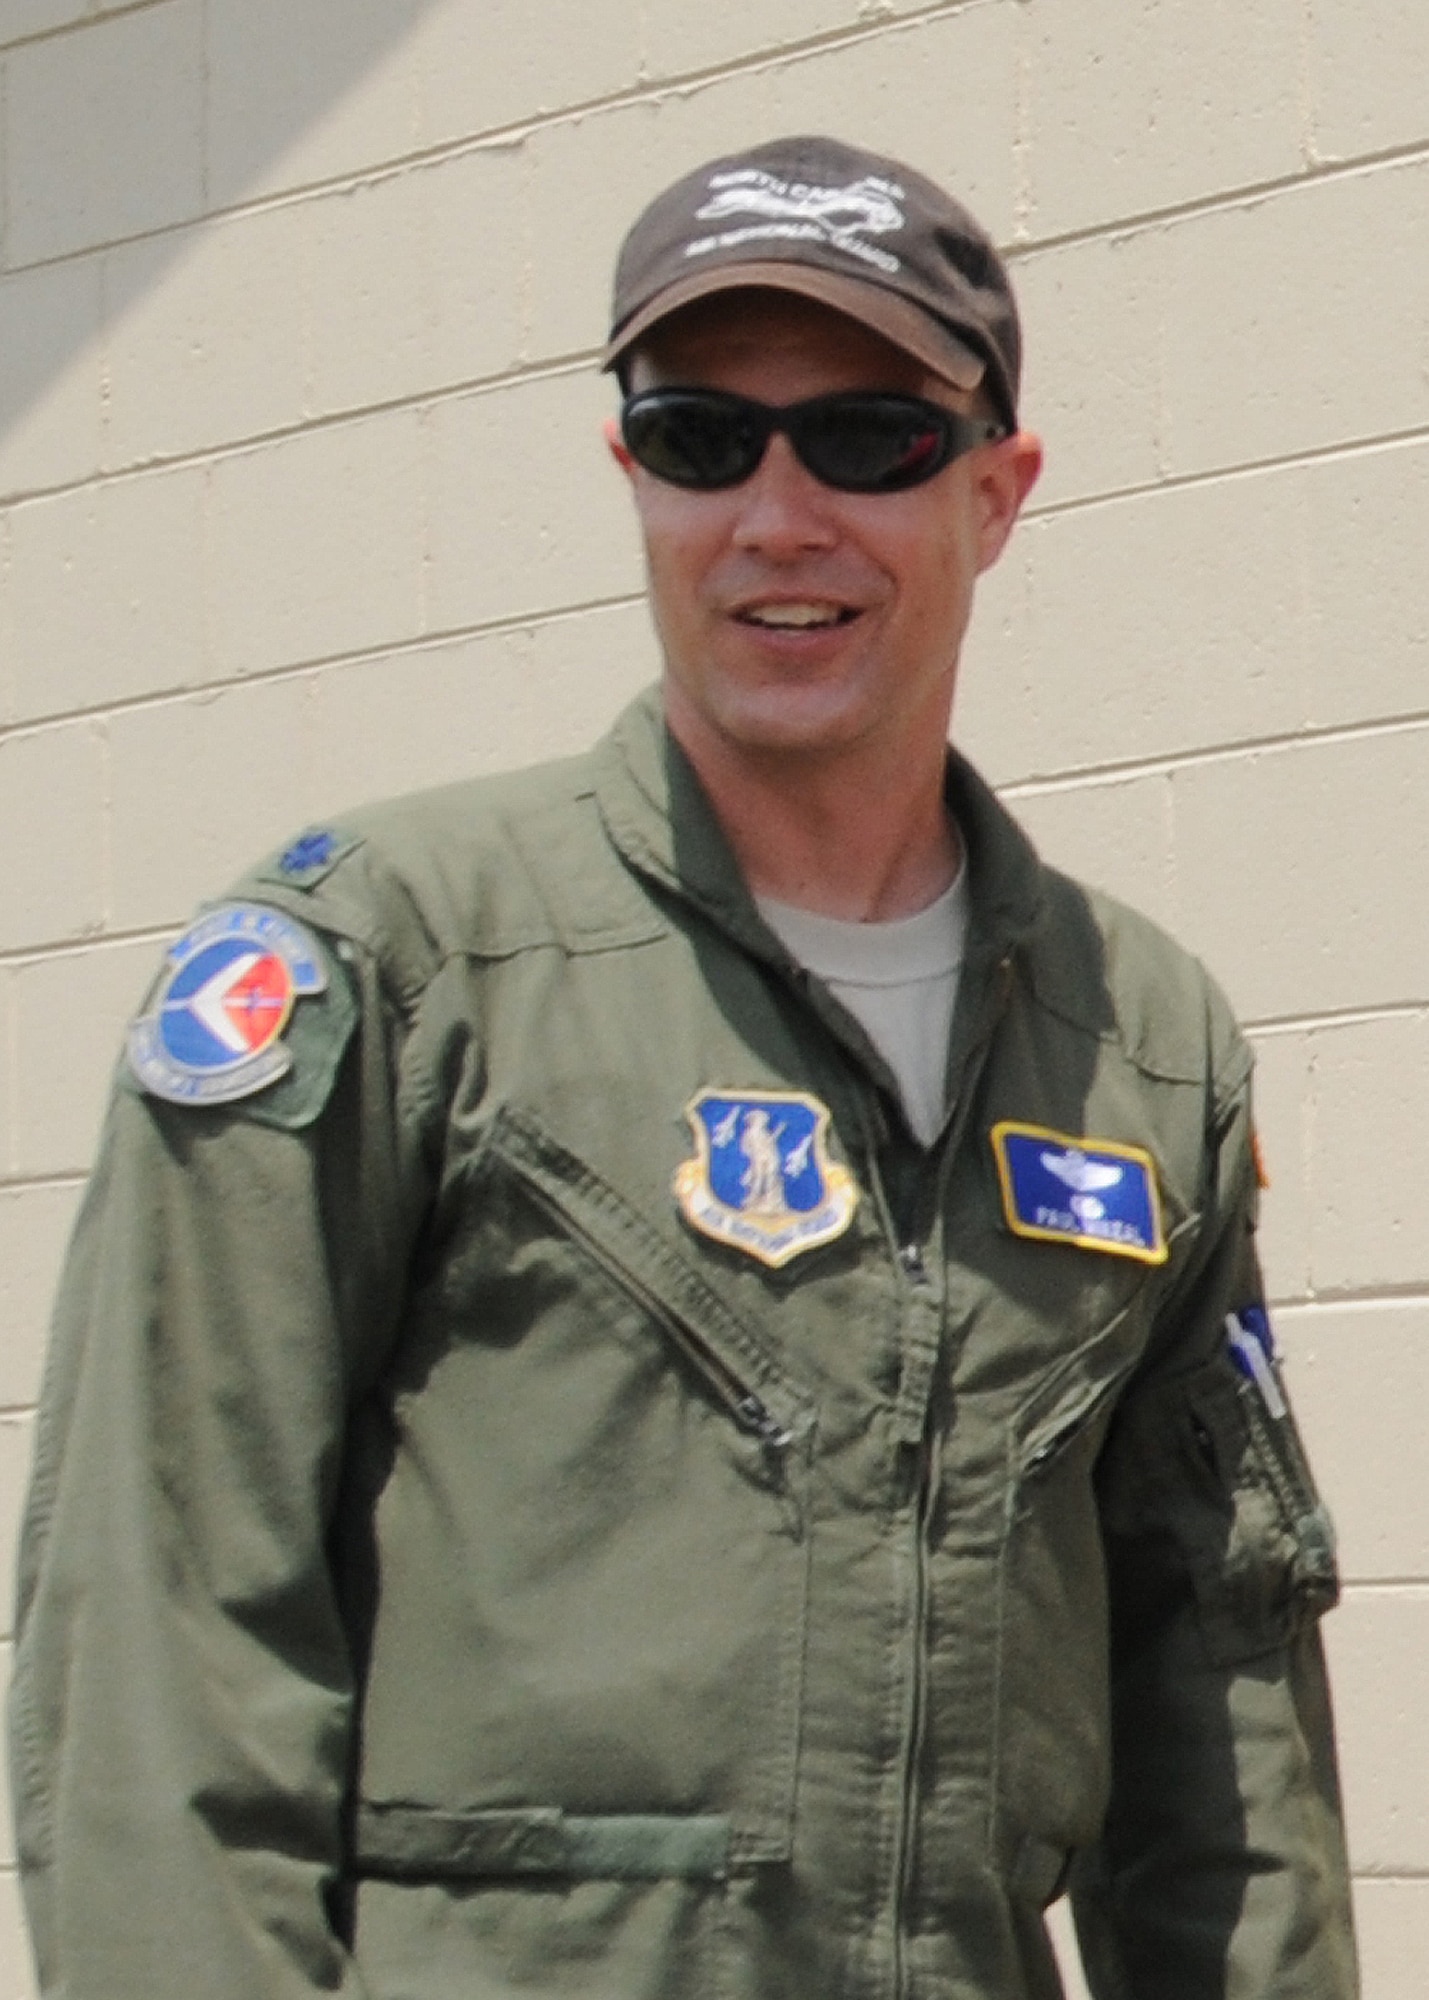 C-130 pilot Lt. Col. Paul K. Mikeal, one of 4 crew members who were killed July 1, 2012 after their C-130 crashed while fighting wildfires in South Dakota. 
(courtesy photo)
